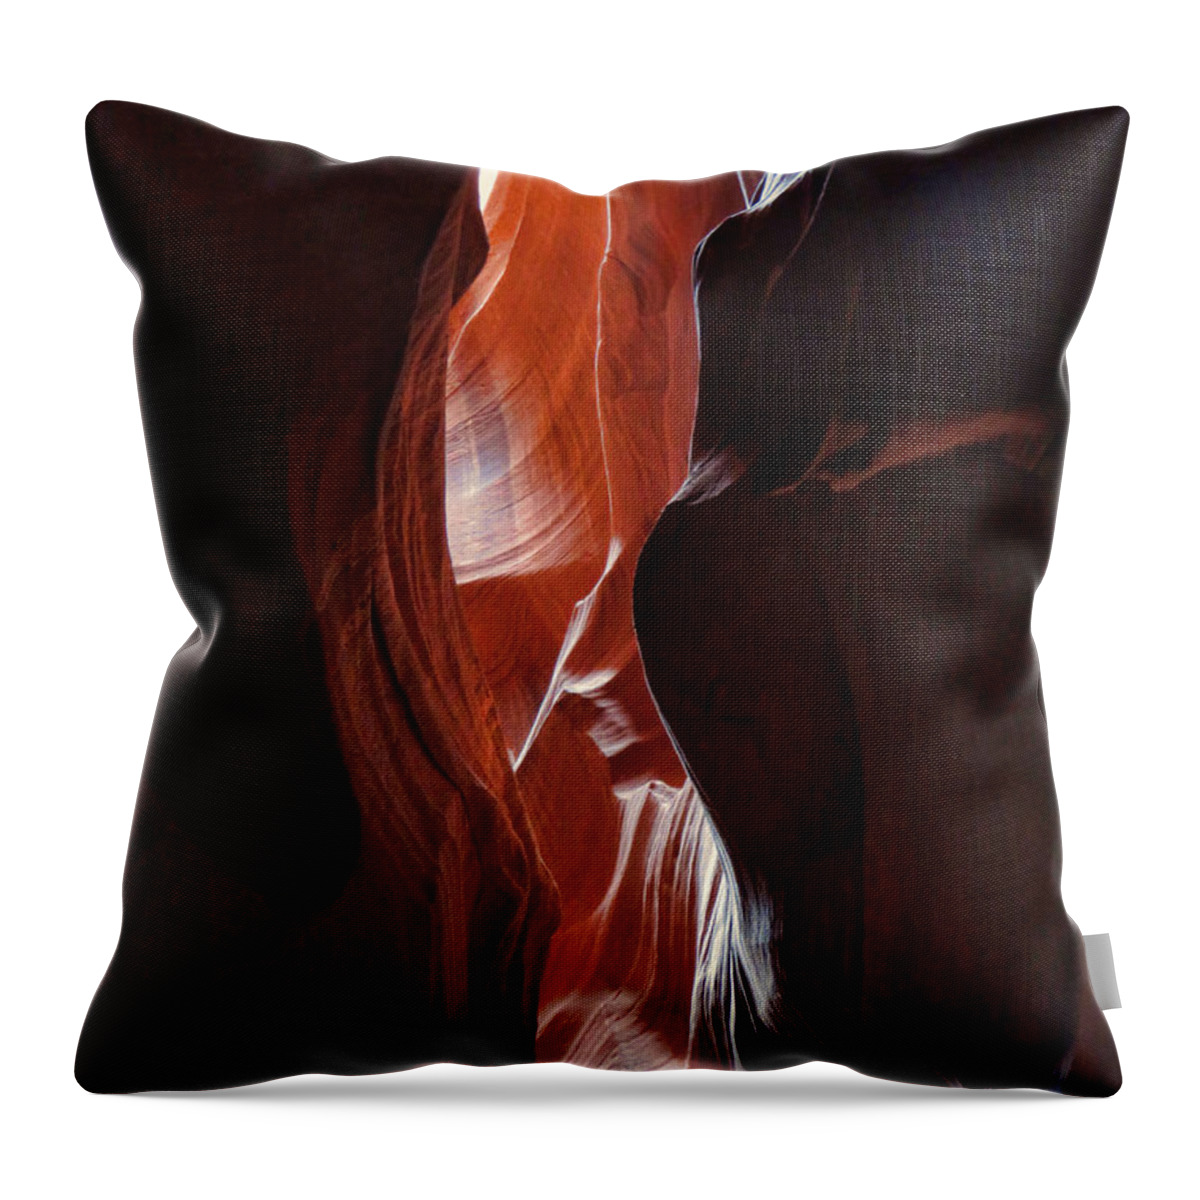 Antelope Valley Throw Pillow featuring the photograph Antelope Valley Slot Canyon 7 by Helaine Cummins